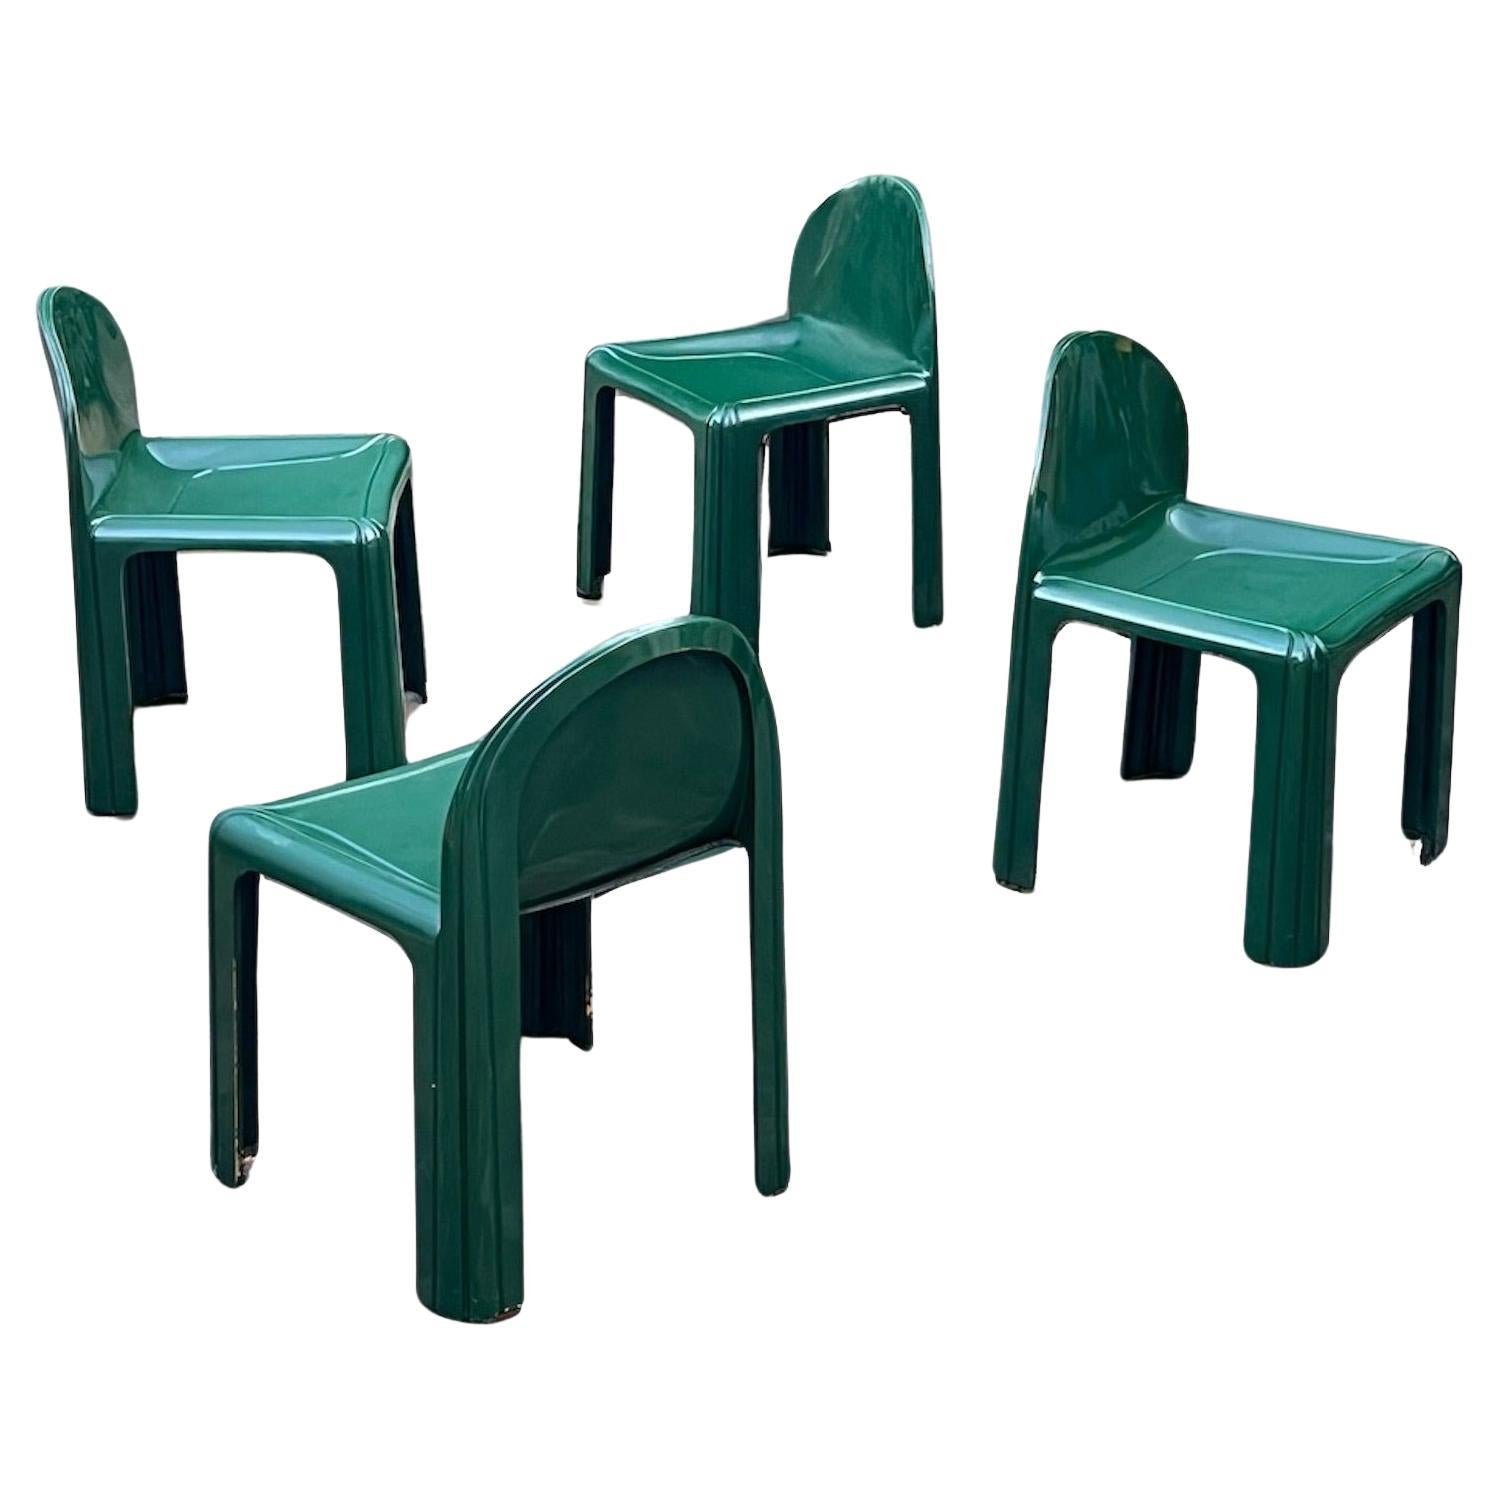 Kartell Model 4854 Chairs by Gae Aulenti, 1960s - Set of 4 - Emerald Green Resin For Sale